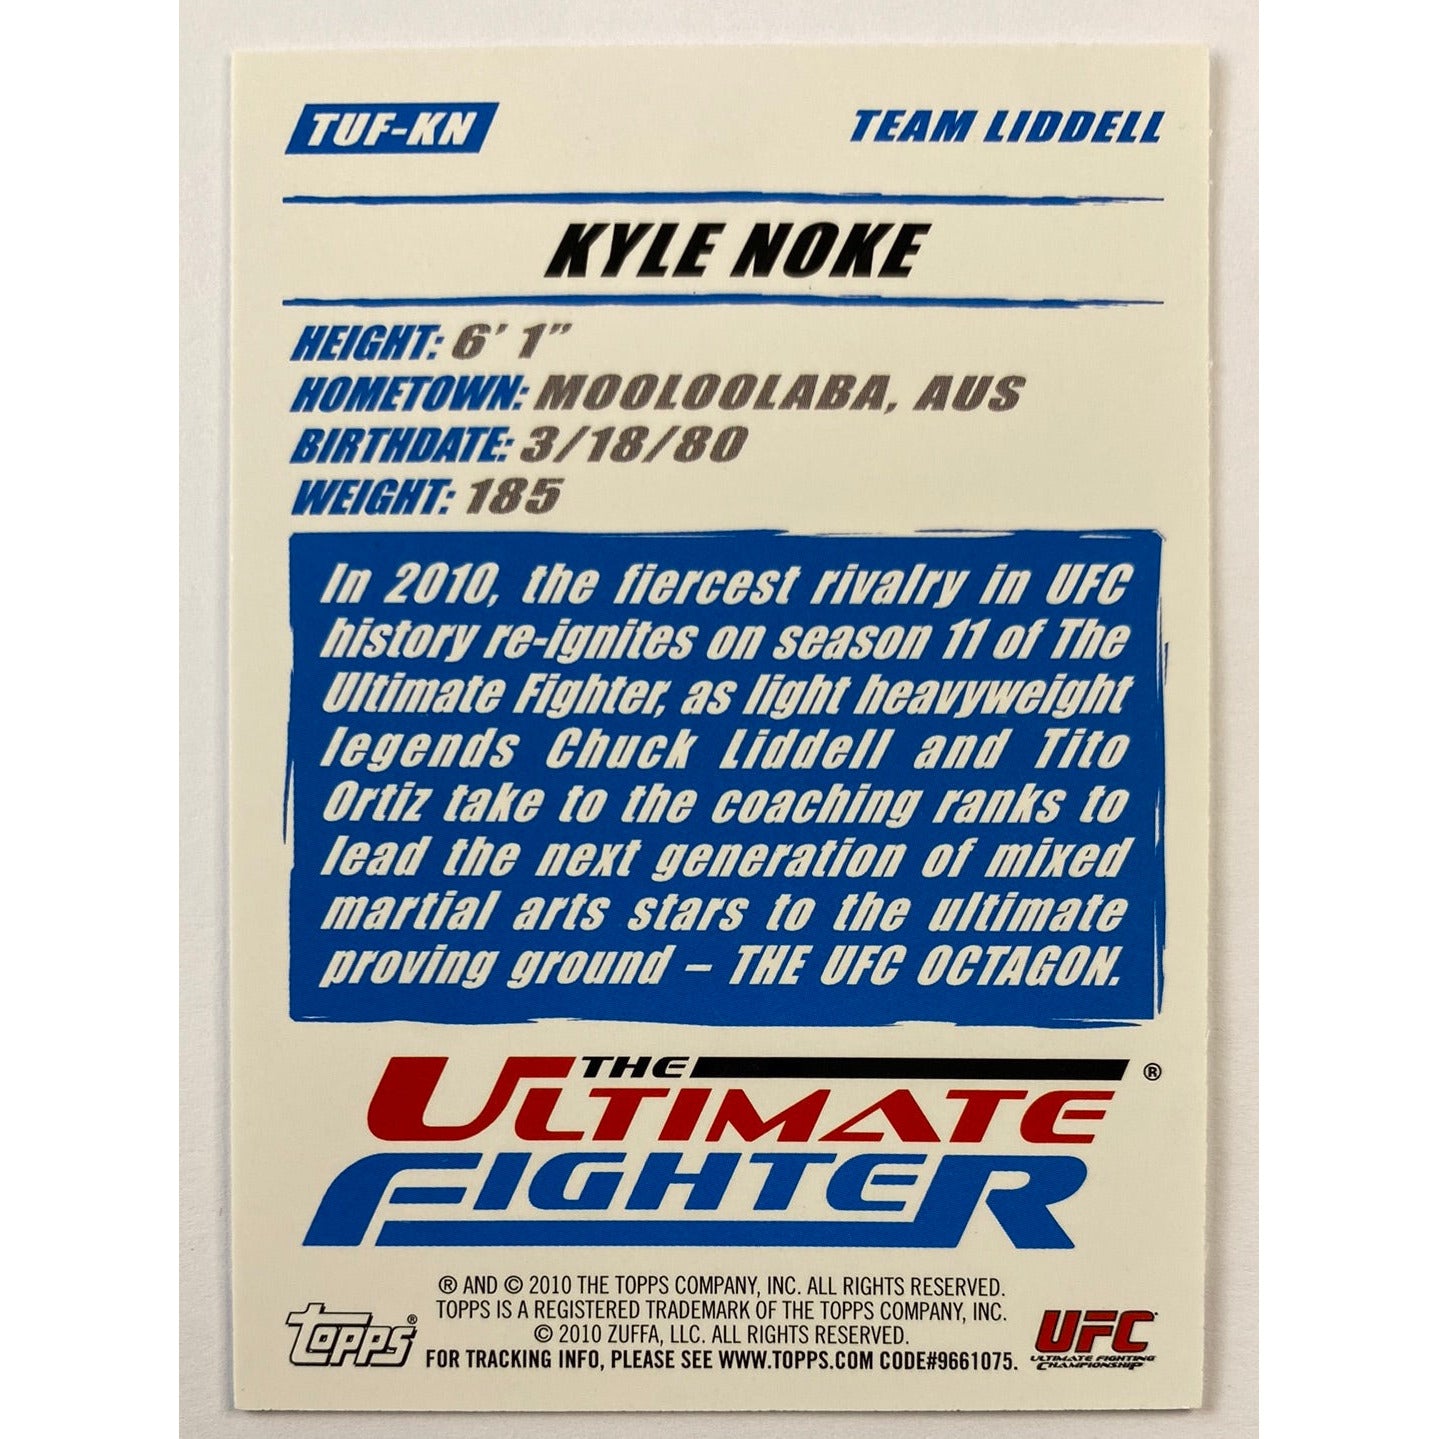 2010 Topps Ultimate Fighter Kyle Noke RC Auto